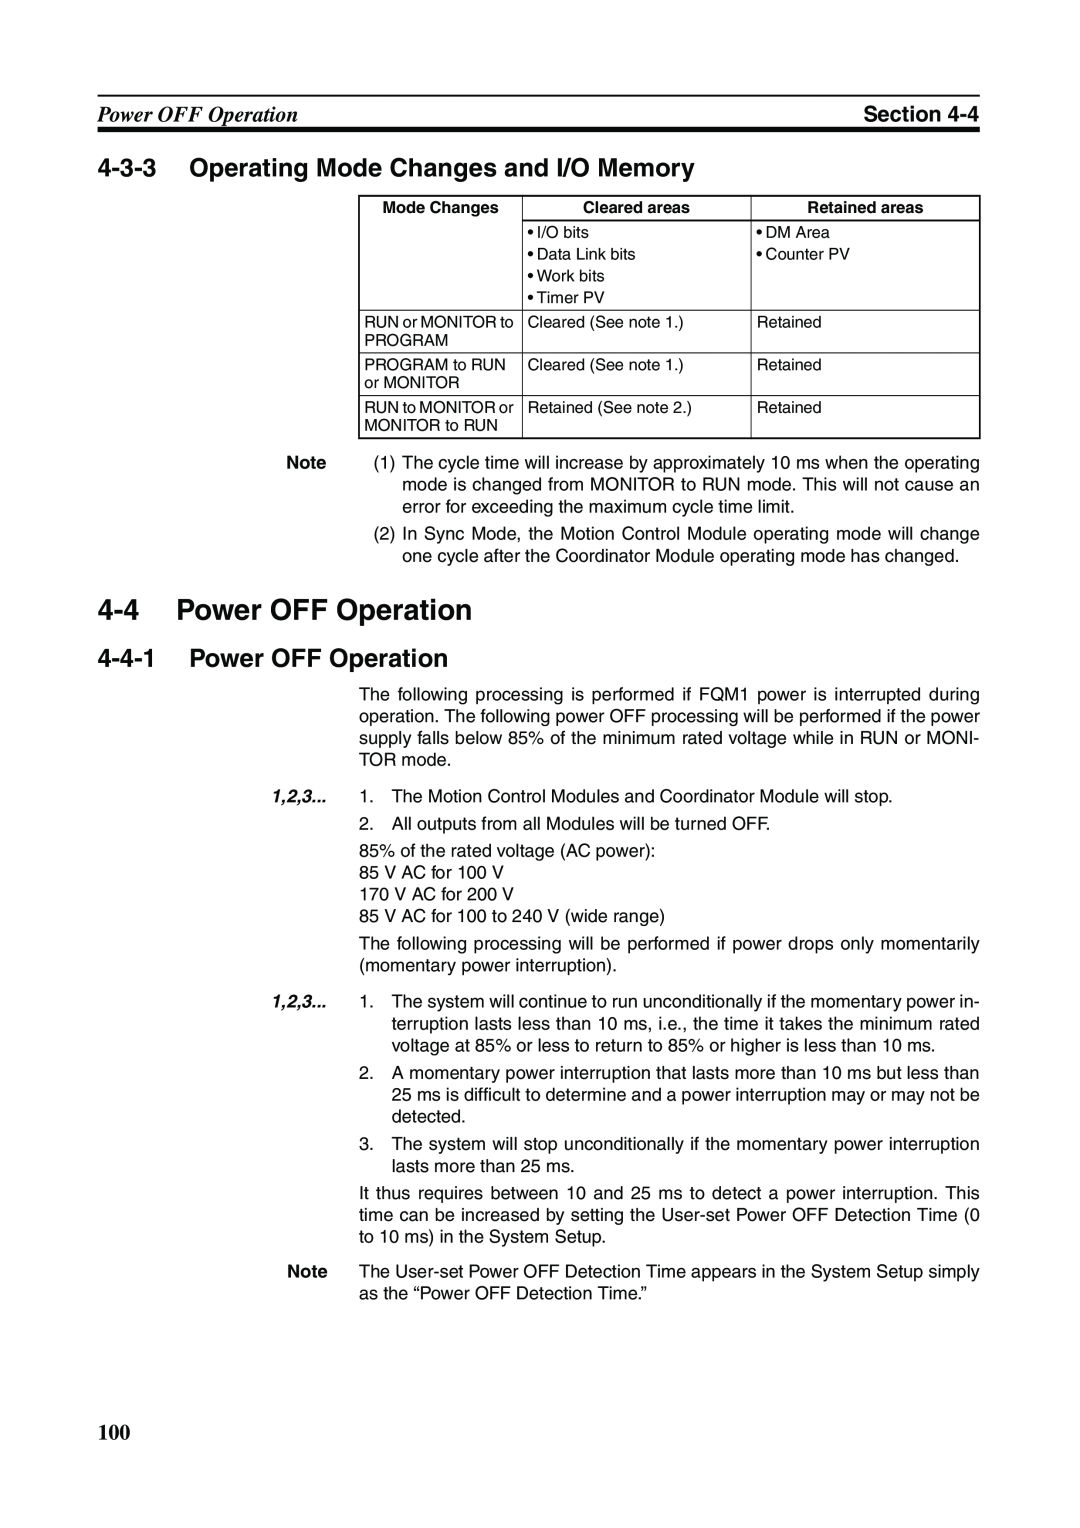 Omron FQM1-CM001, FQM1-MMA21 4-4Power OFF Operation, 4-3-3Operating Mode Changes and I/O Memory, 4-4-1Power OFF Operation 